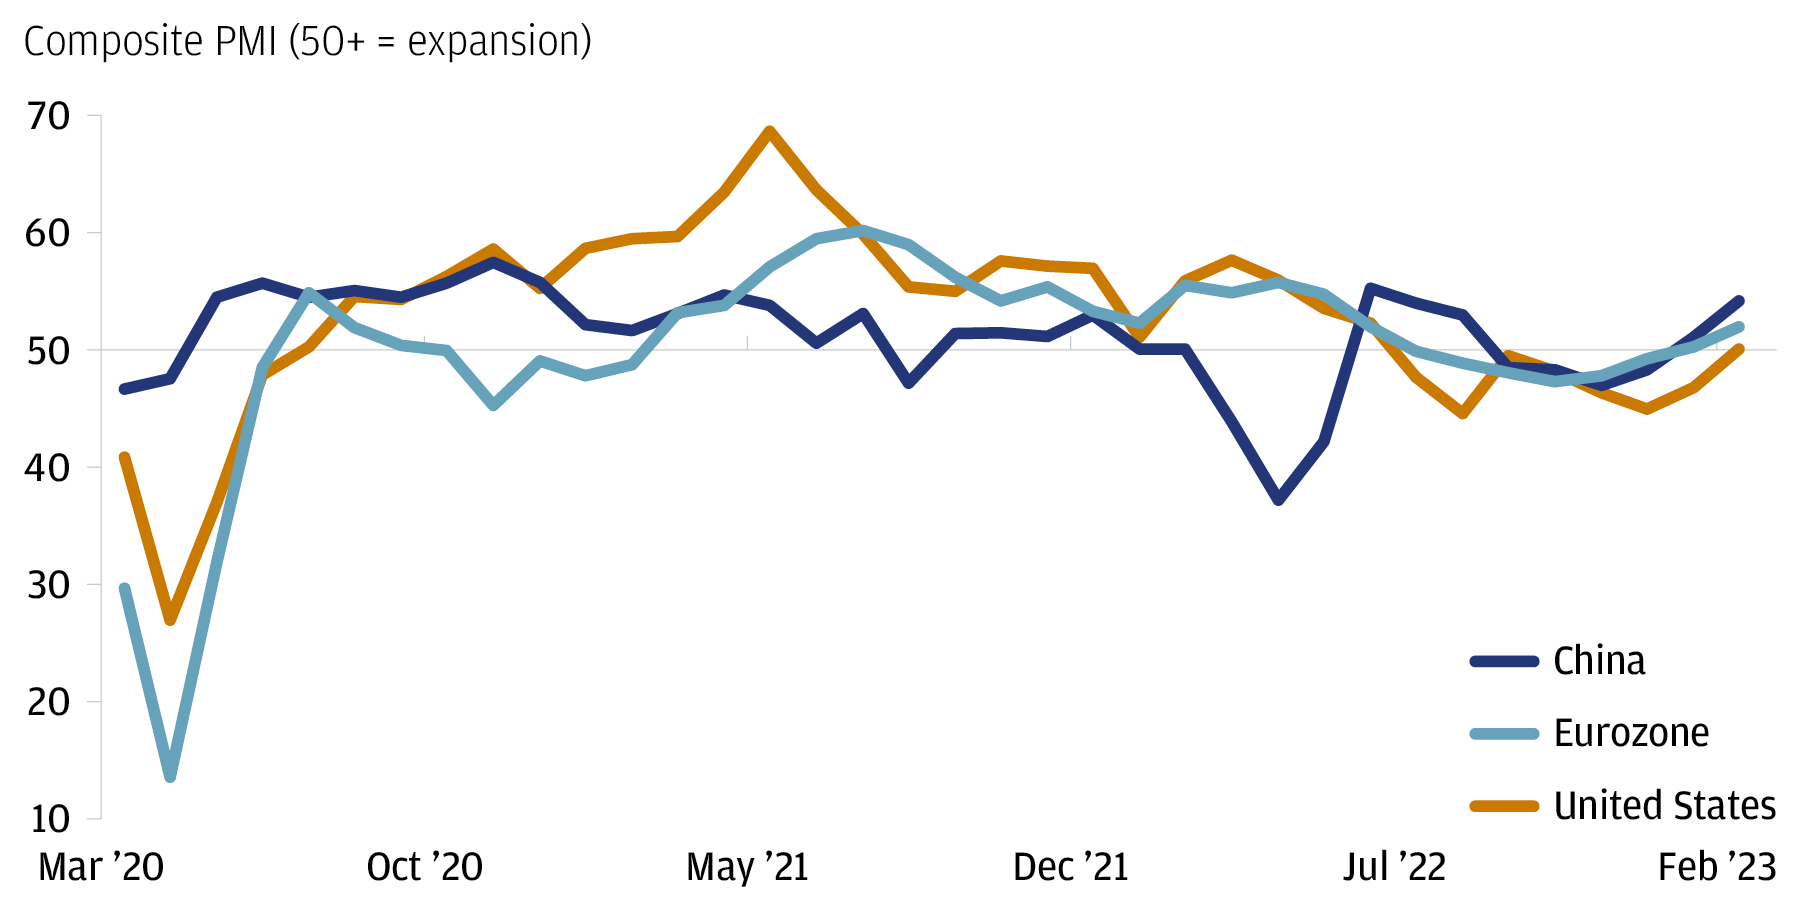 This chart measures the time series of Composite PMI for U.S., China, and Eurozone since April 2020 through February 2023